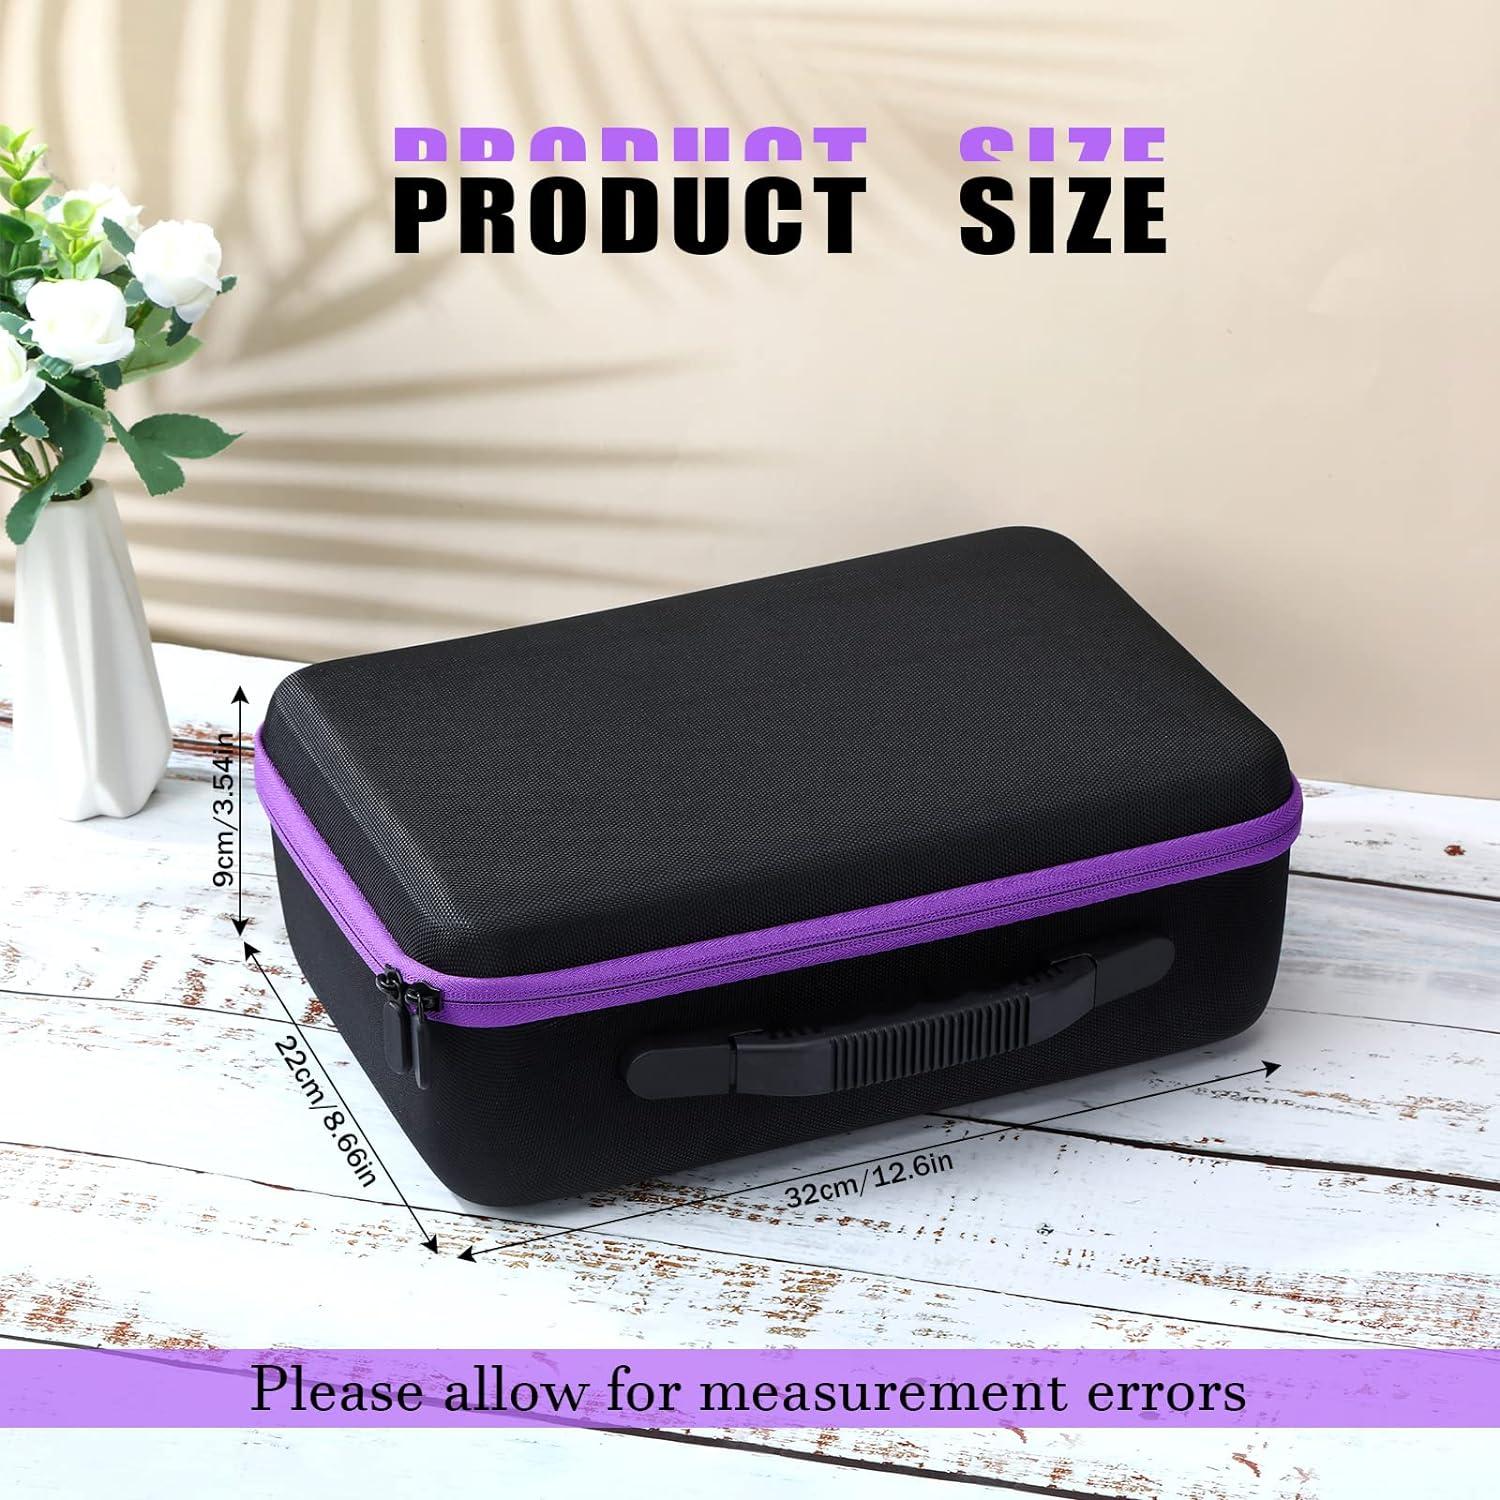 120 Bottle Essential Oil Storage EVA Hard Shell Exterior Carrying Case  Organizer Essential Oil Holder Essential Oil Organizer 60 Bottles Per Layer  Foam Insert Traveling Bag for 5 10 and 15 ml Purple